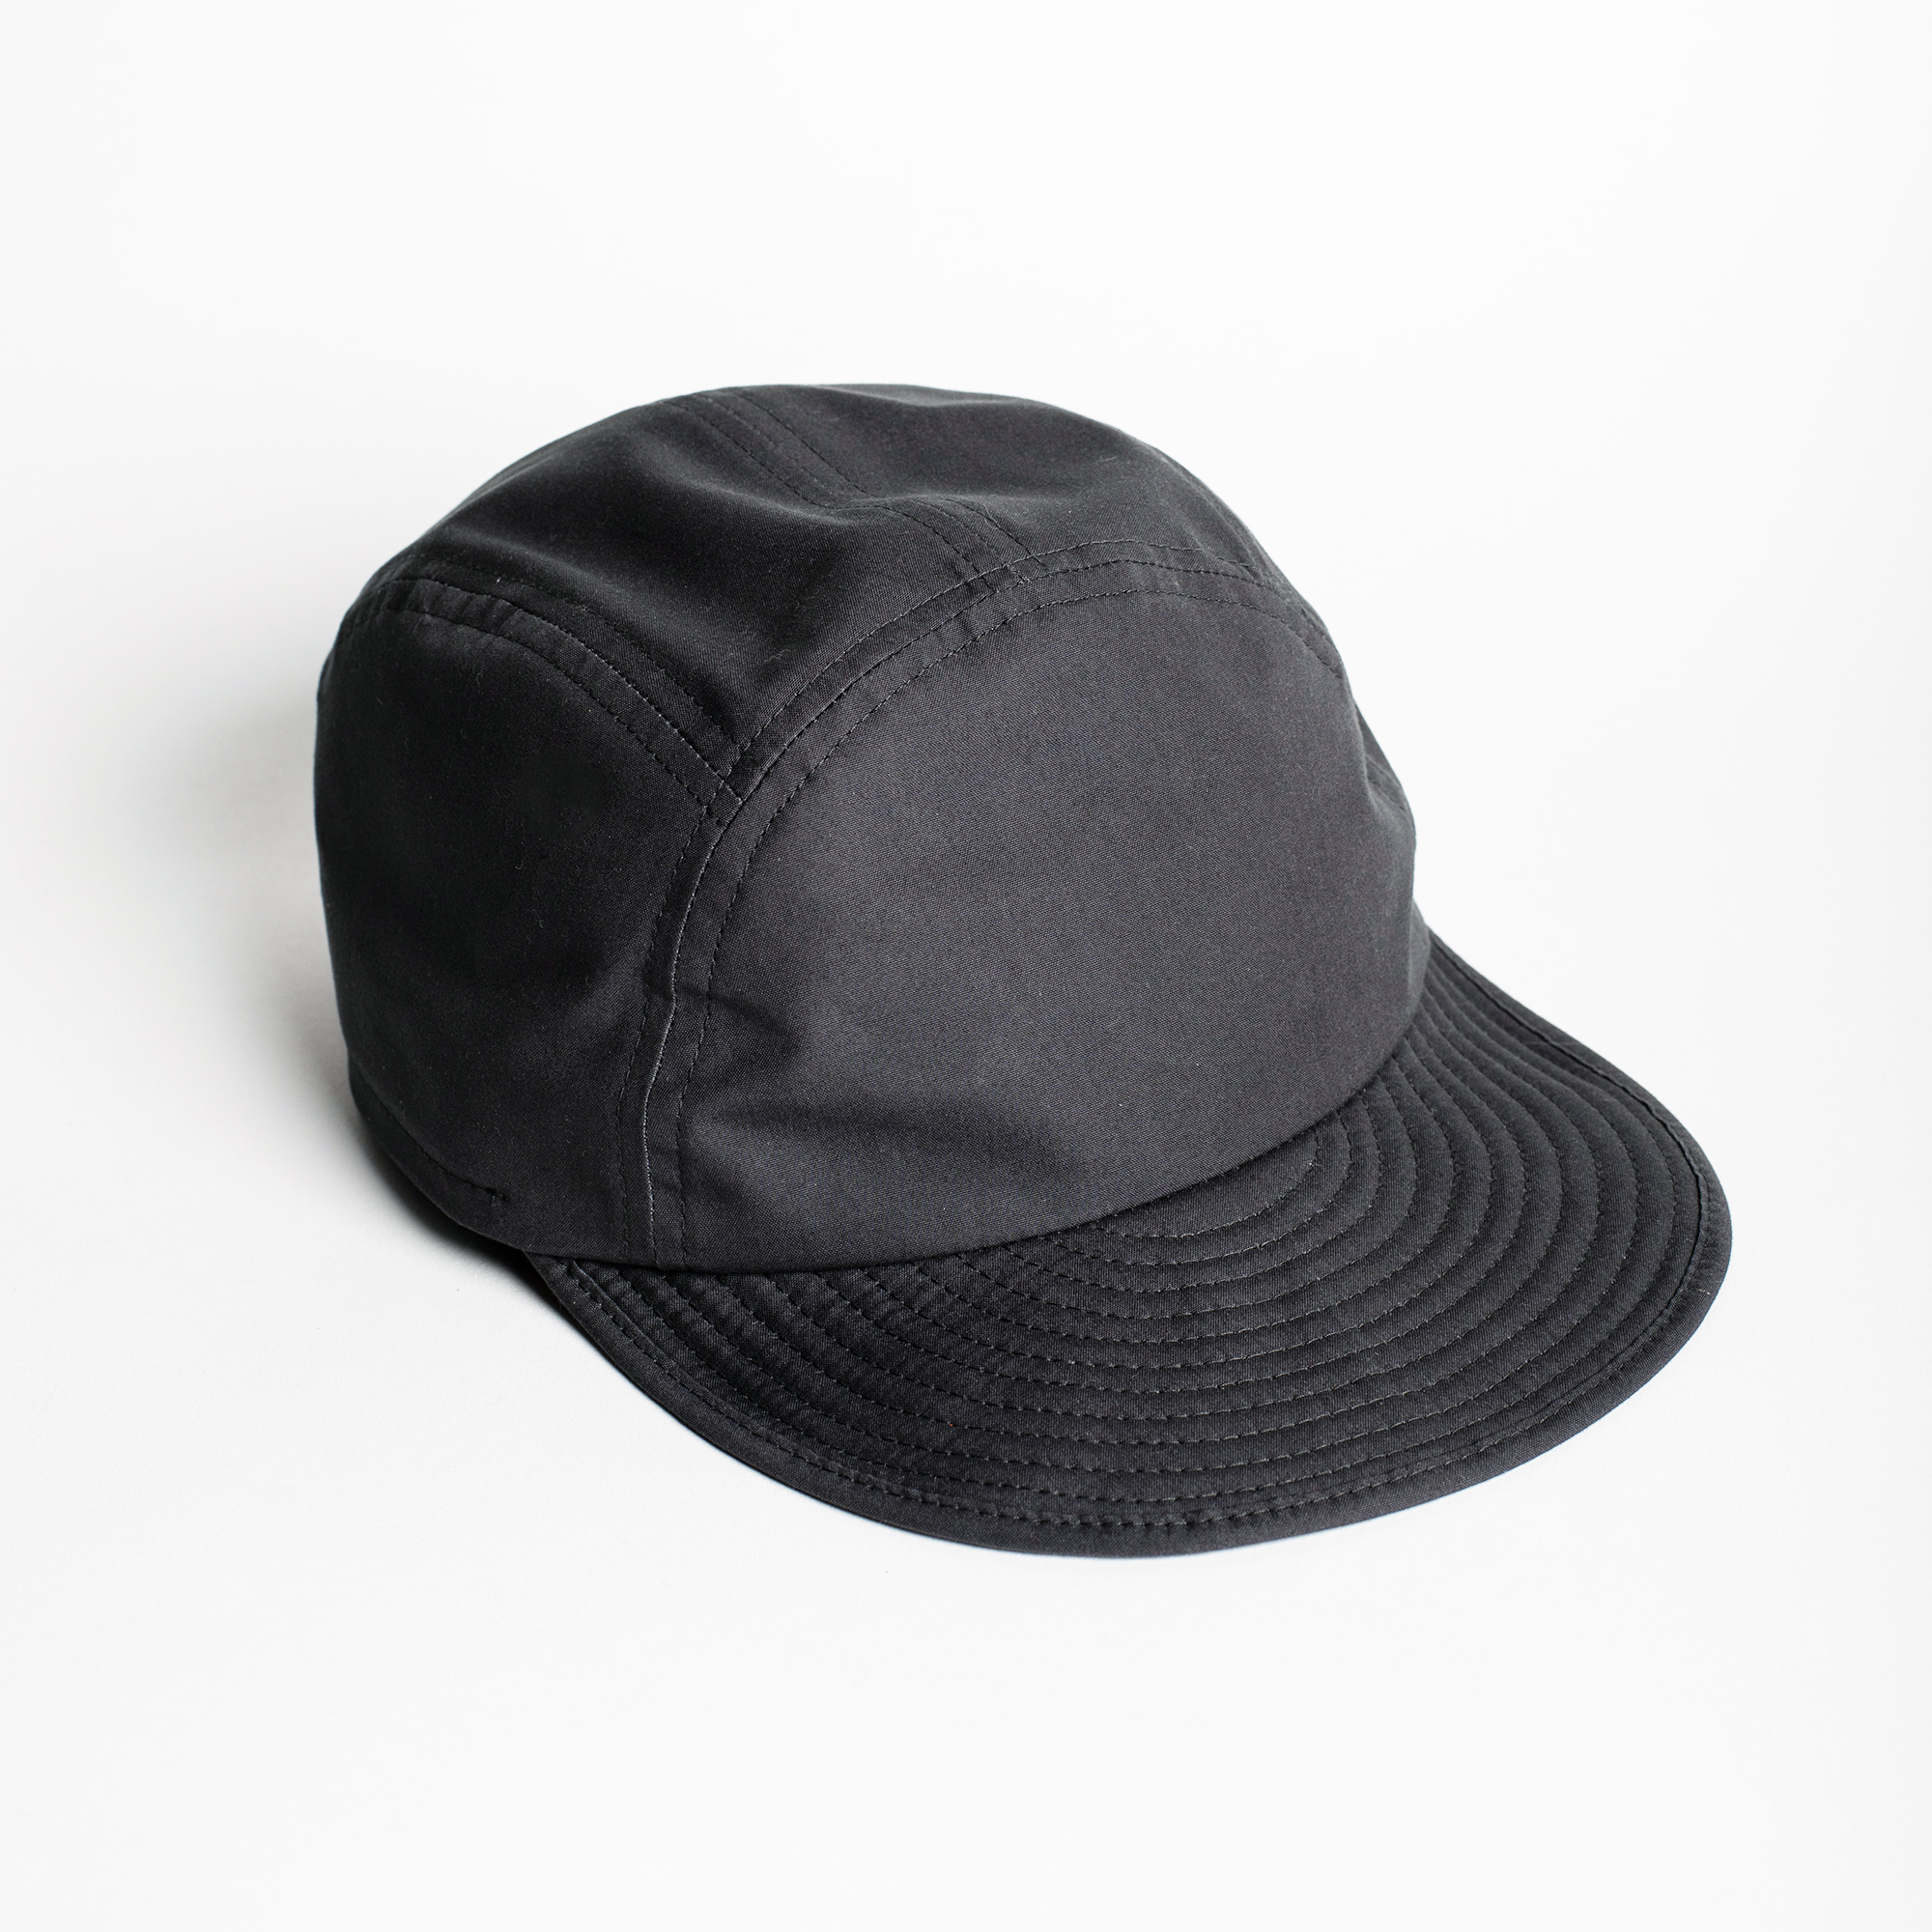 MARINA CAP in Charcoal Ventile by Arpenteur